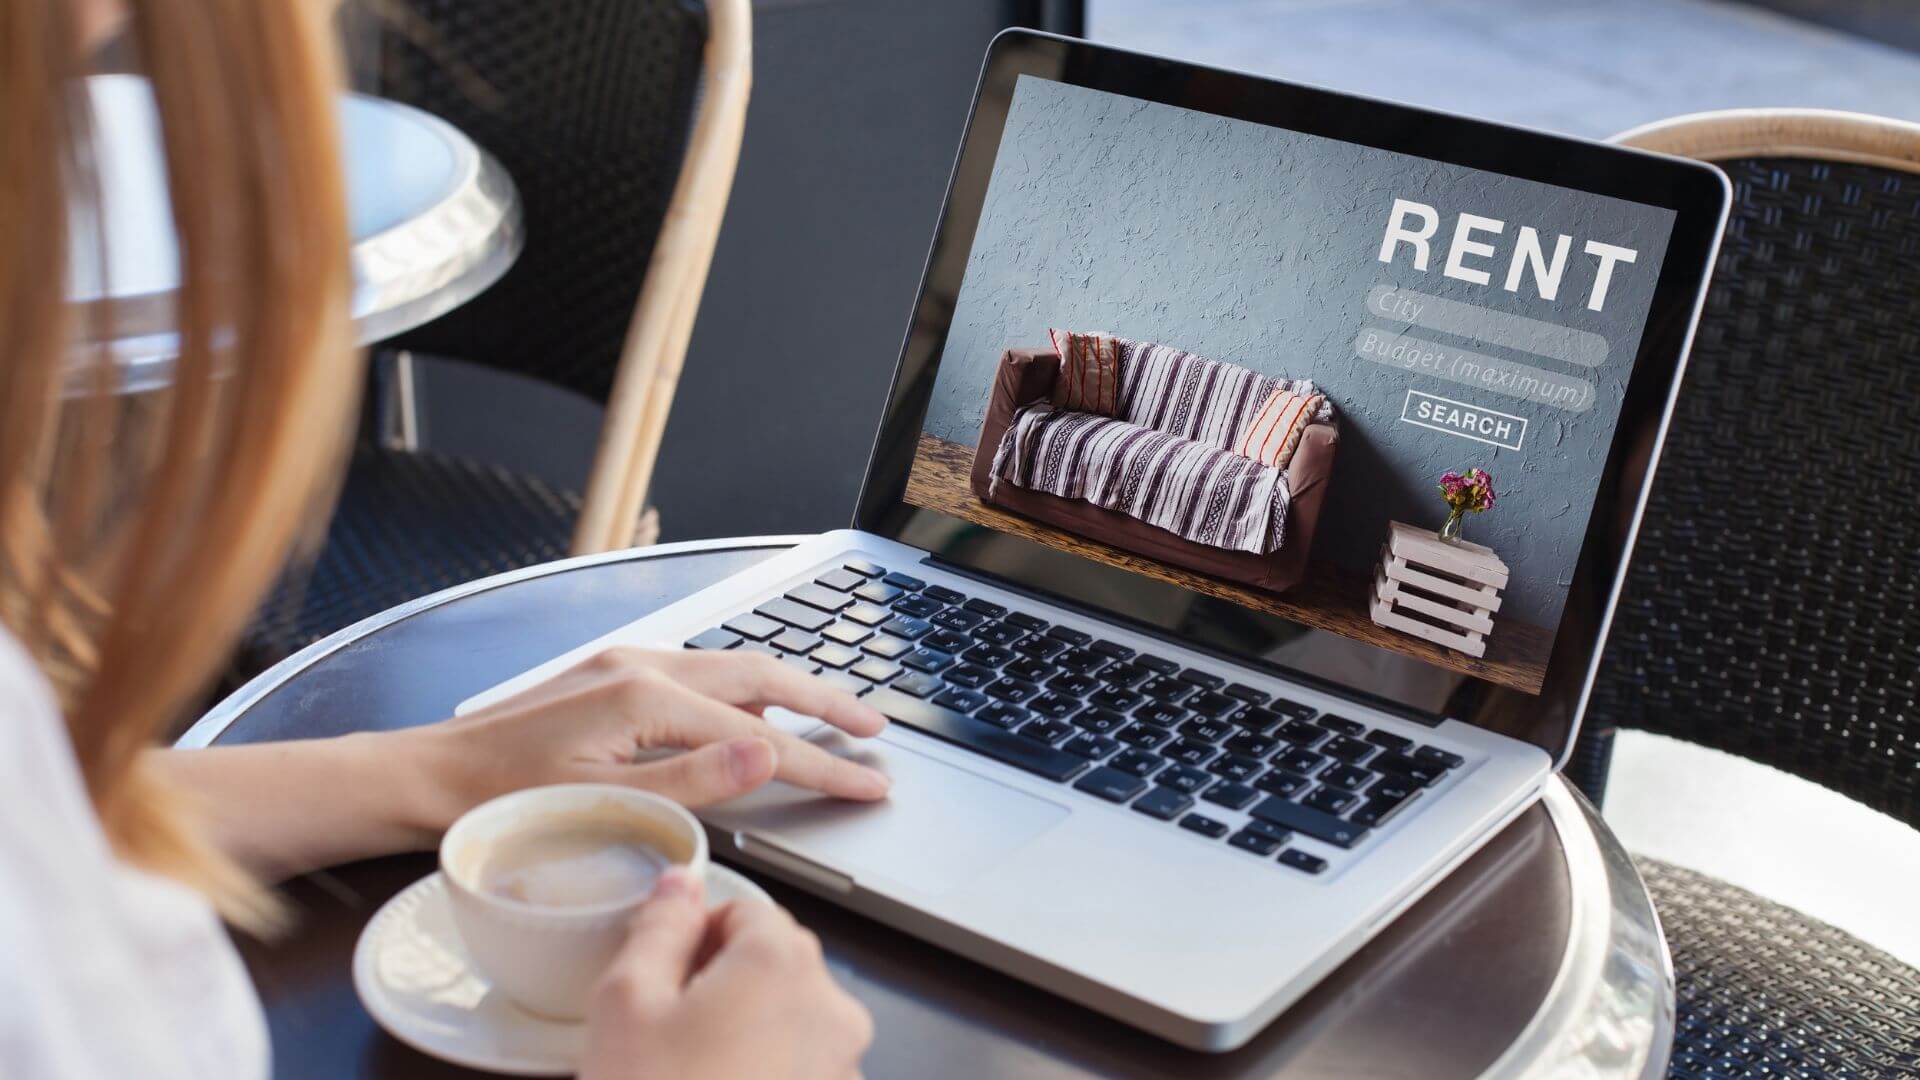 A woman is browsing rental property listings on a laptop at an outdoor cafe, the screen displaying a search interface with options for city and budget.